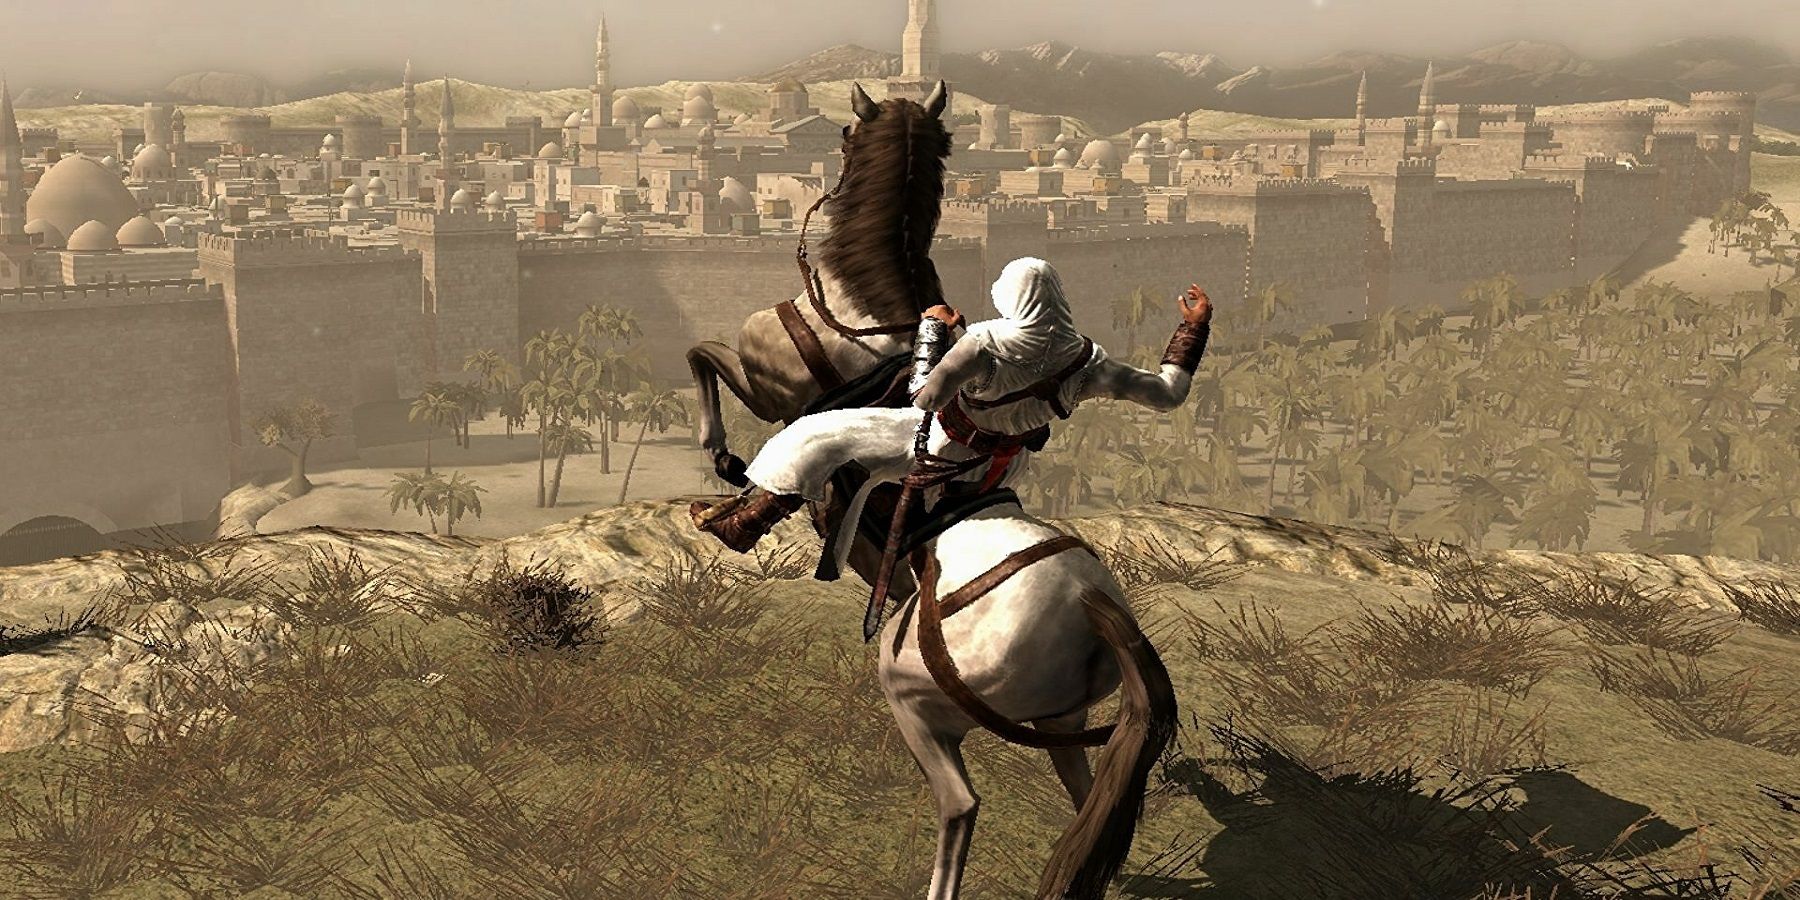 Assassin's Creed 1's horses are the result of twisting human skeletons in-engine.